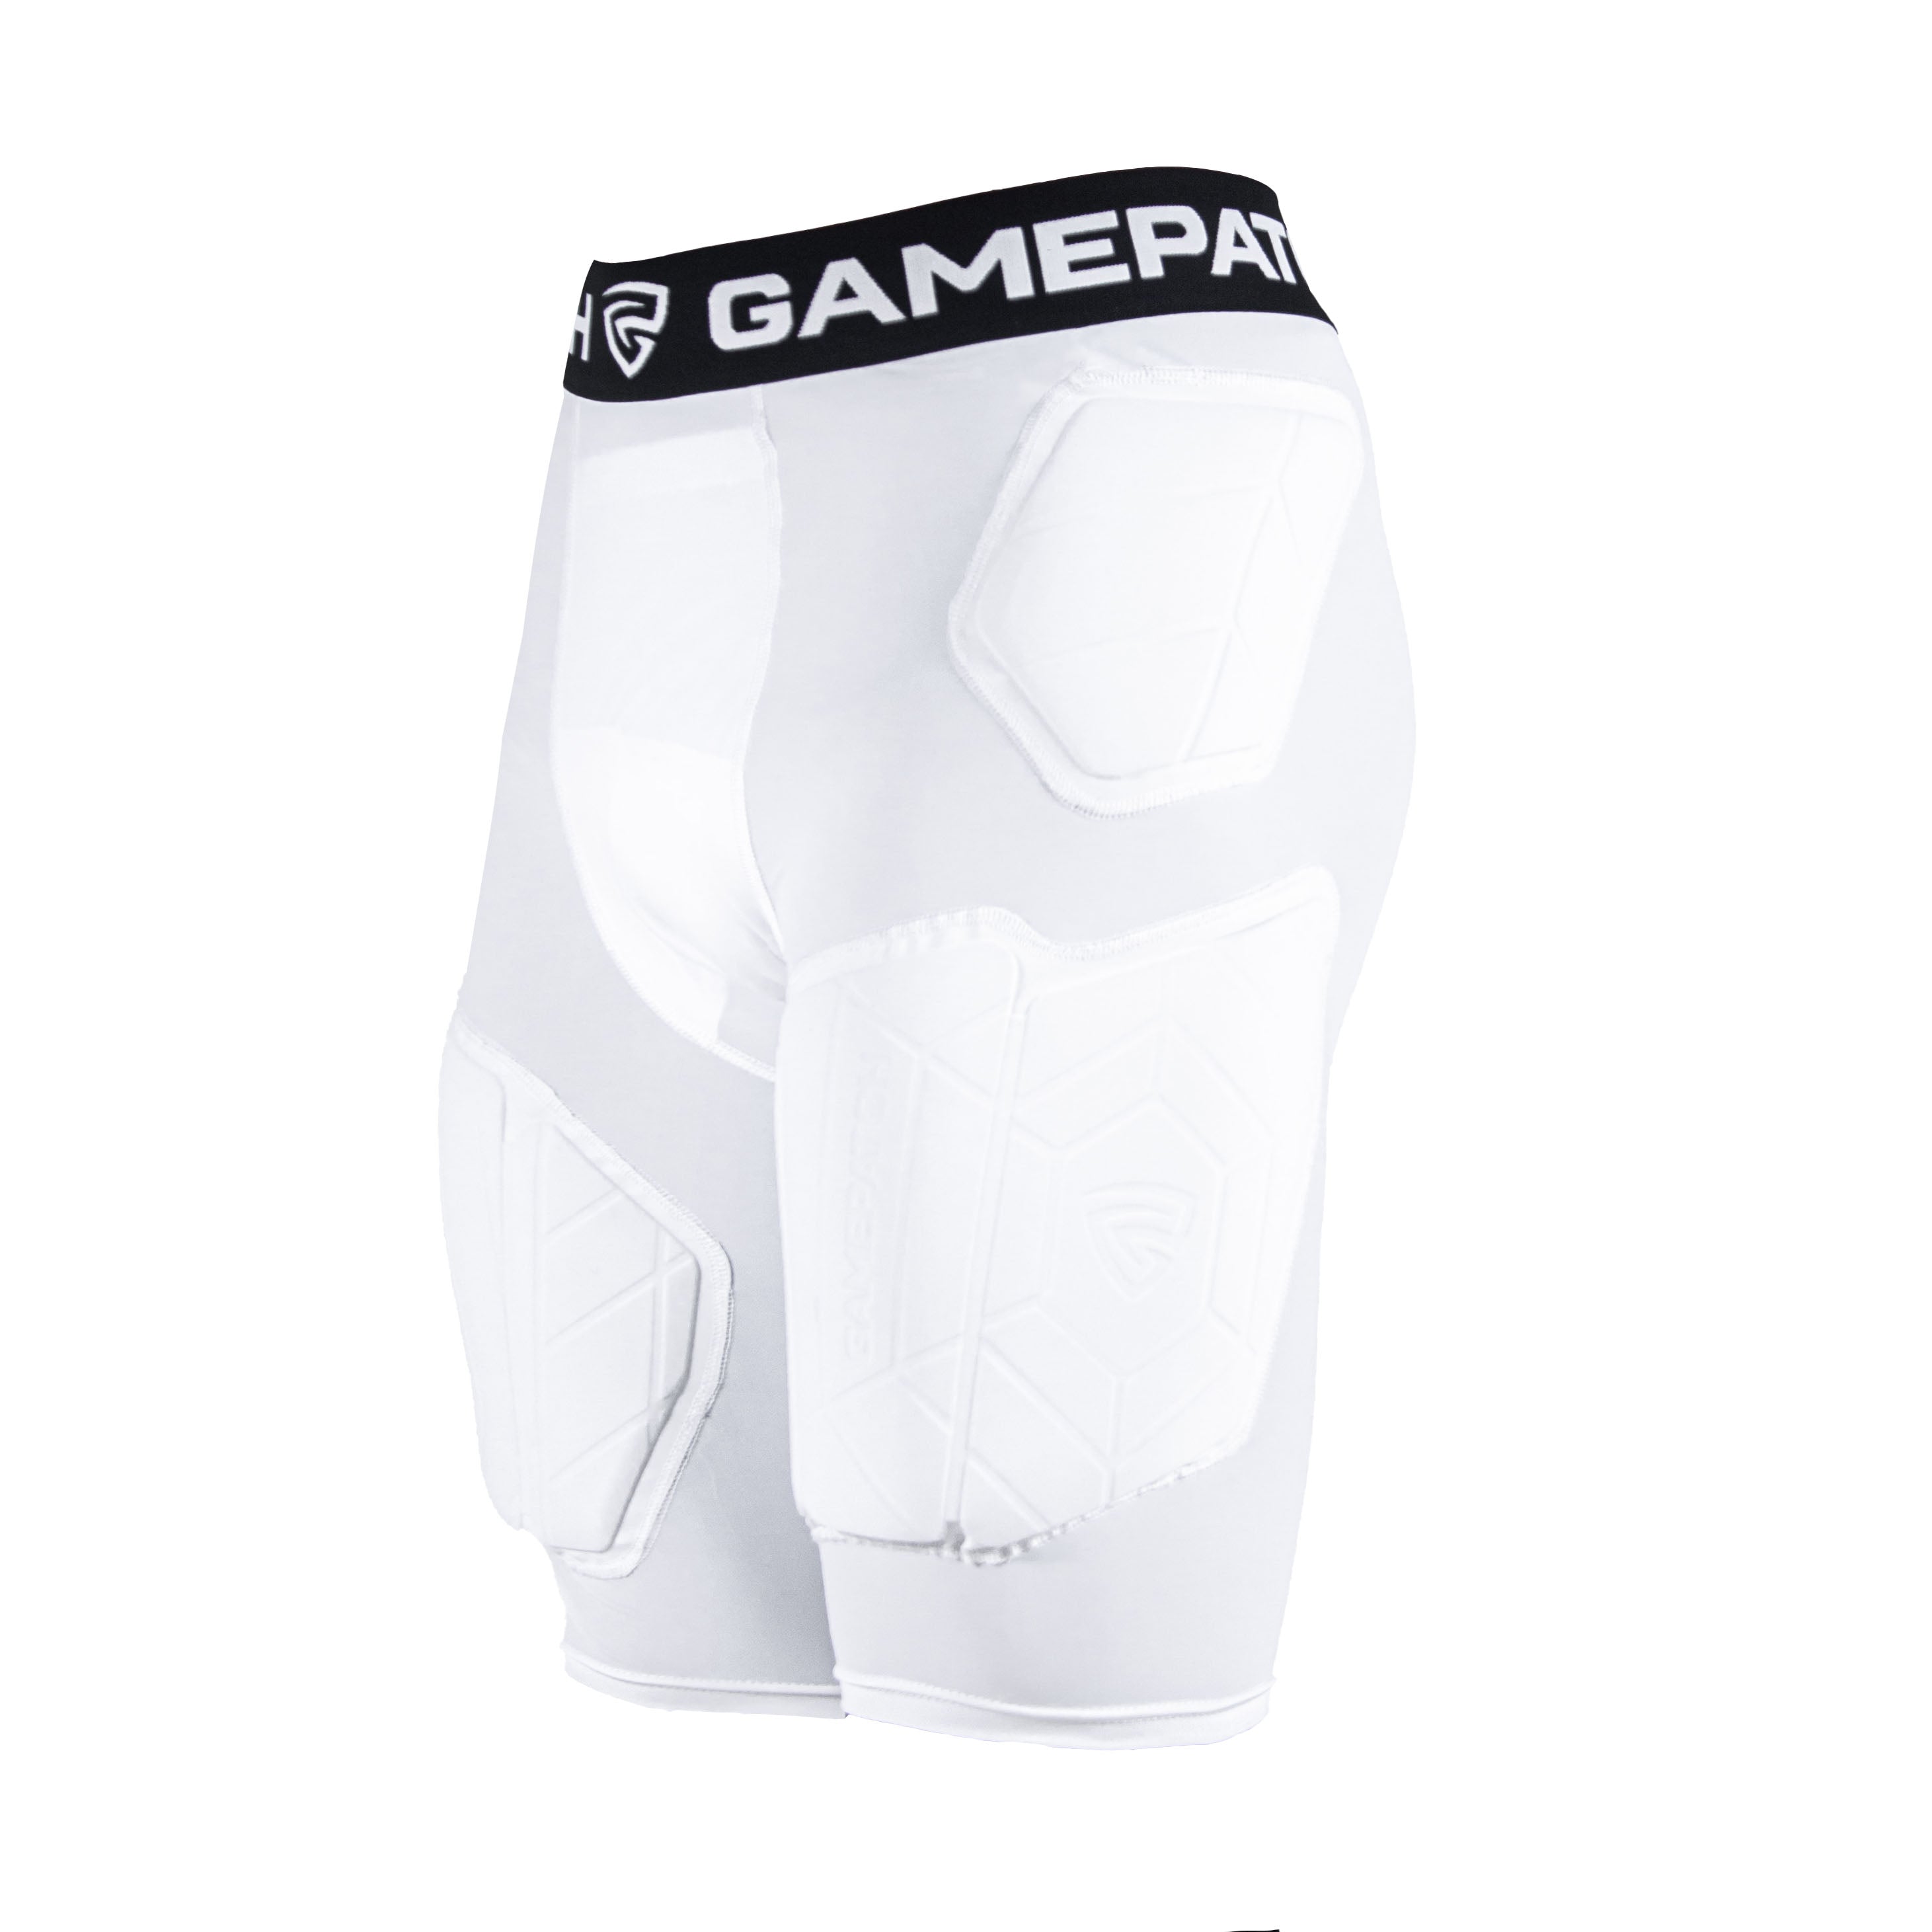 nba compression pants with knee pads